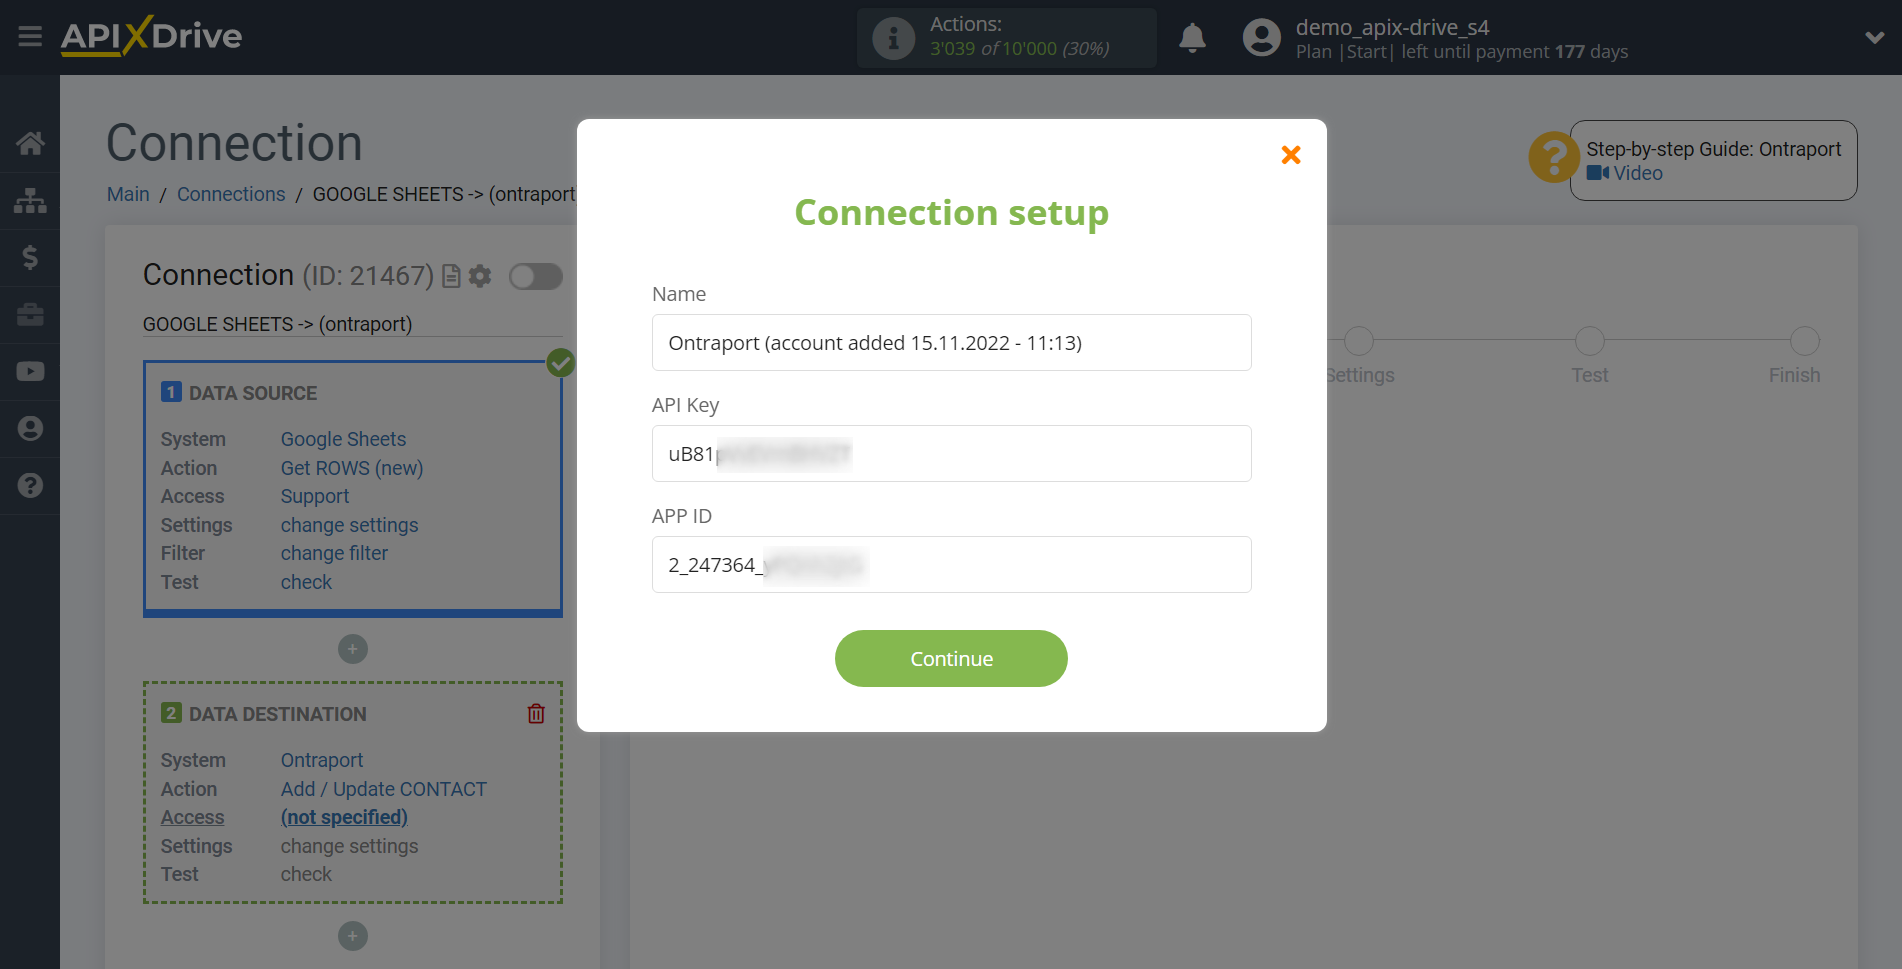 How to Connect Ontraport as Data Destination | Account connection